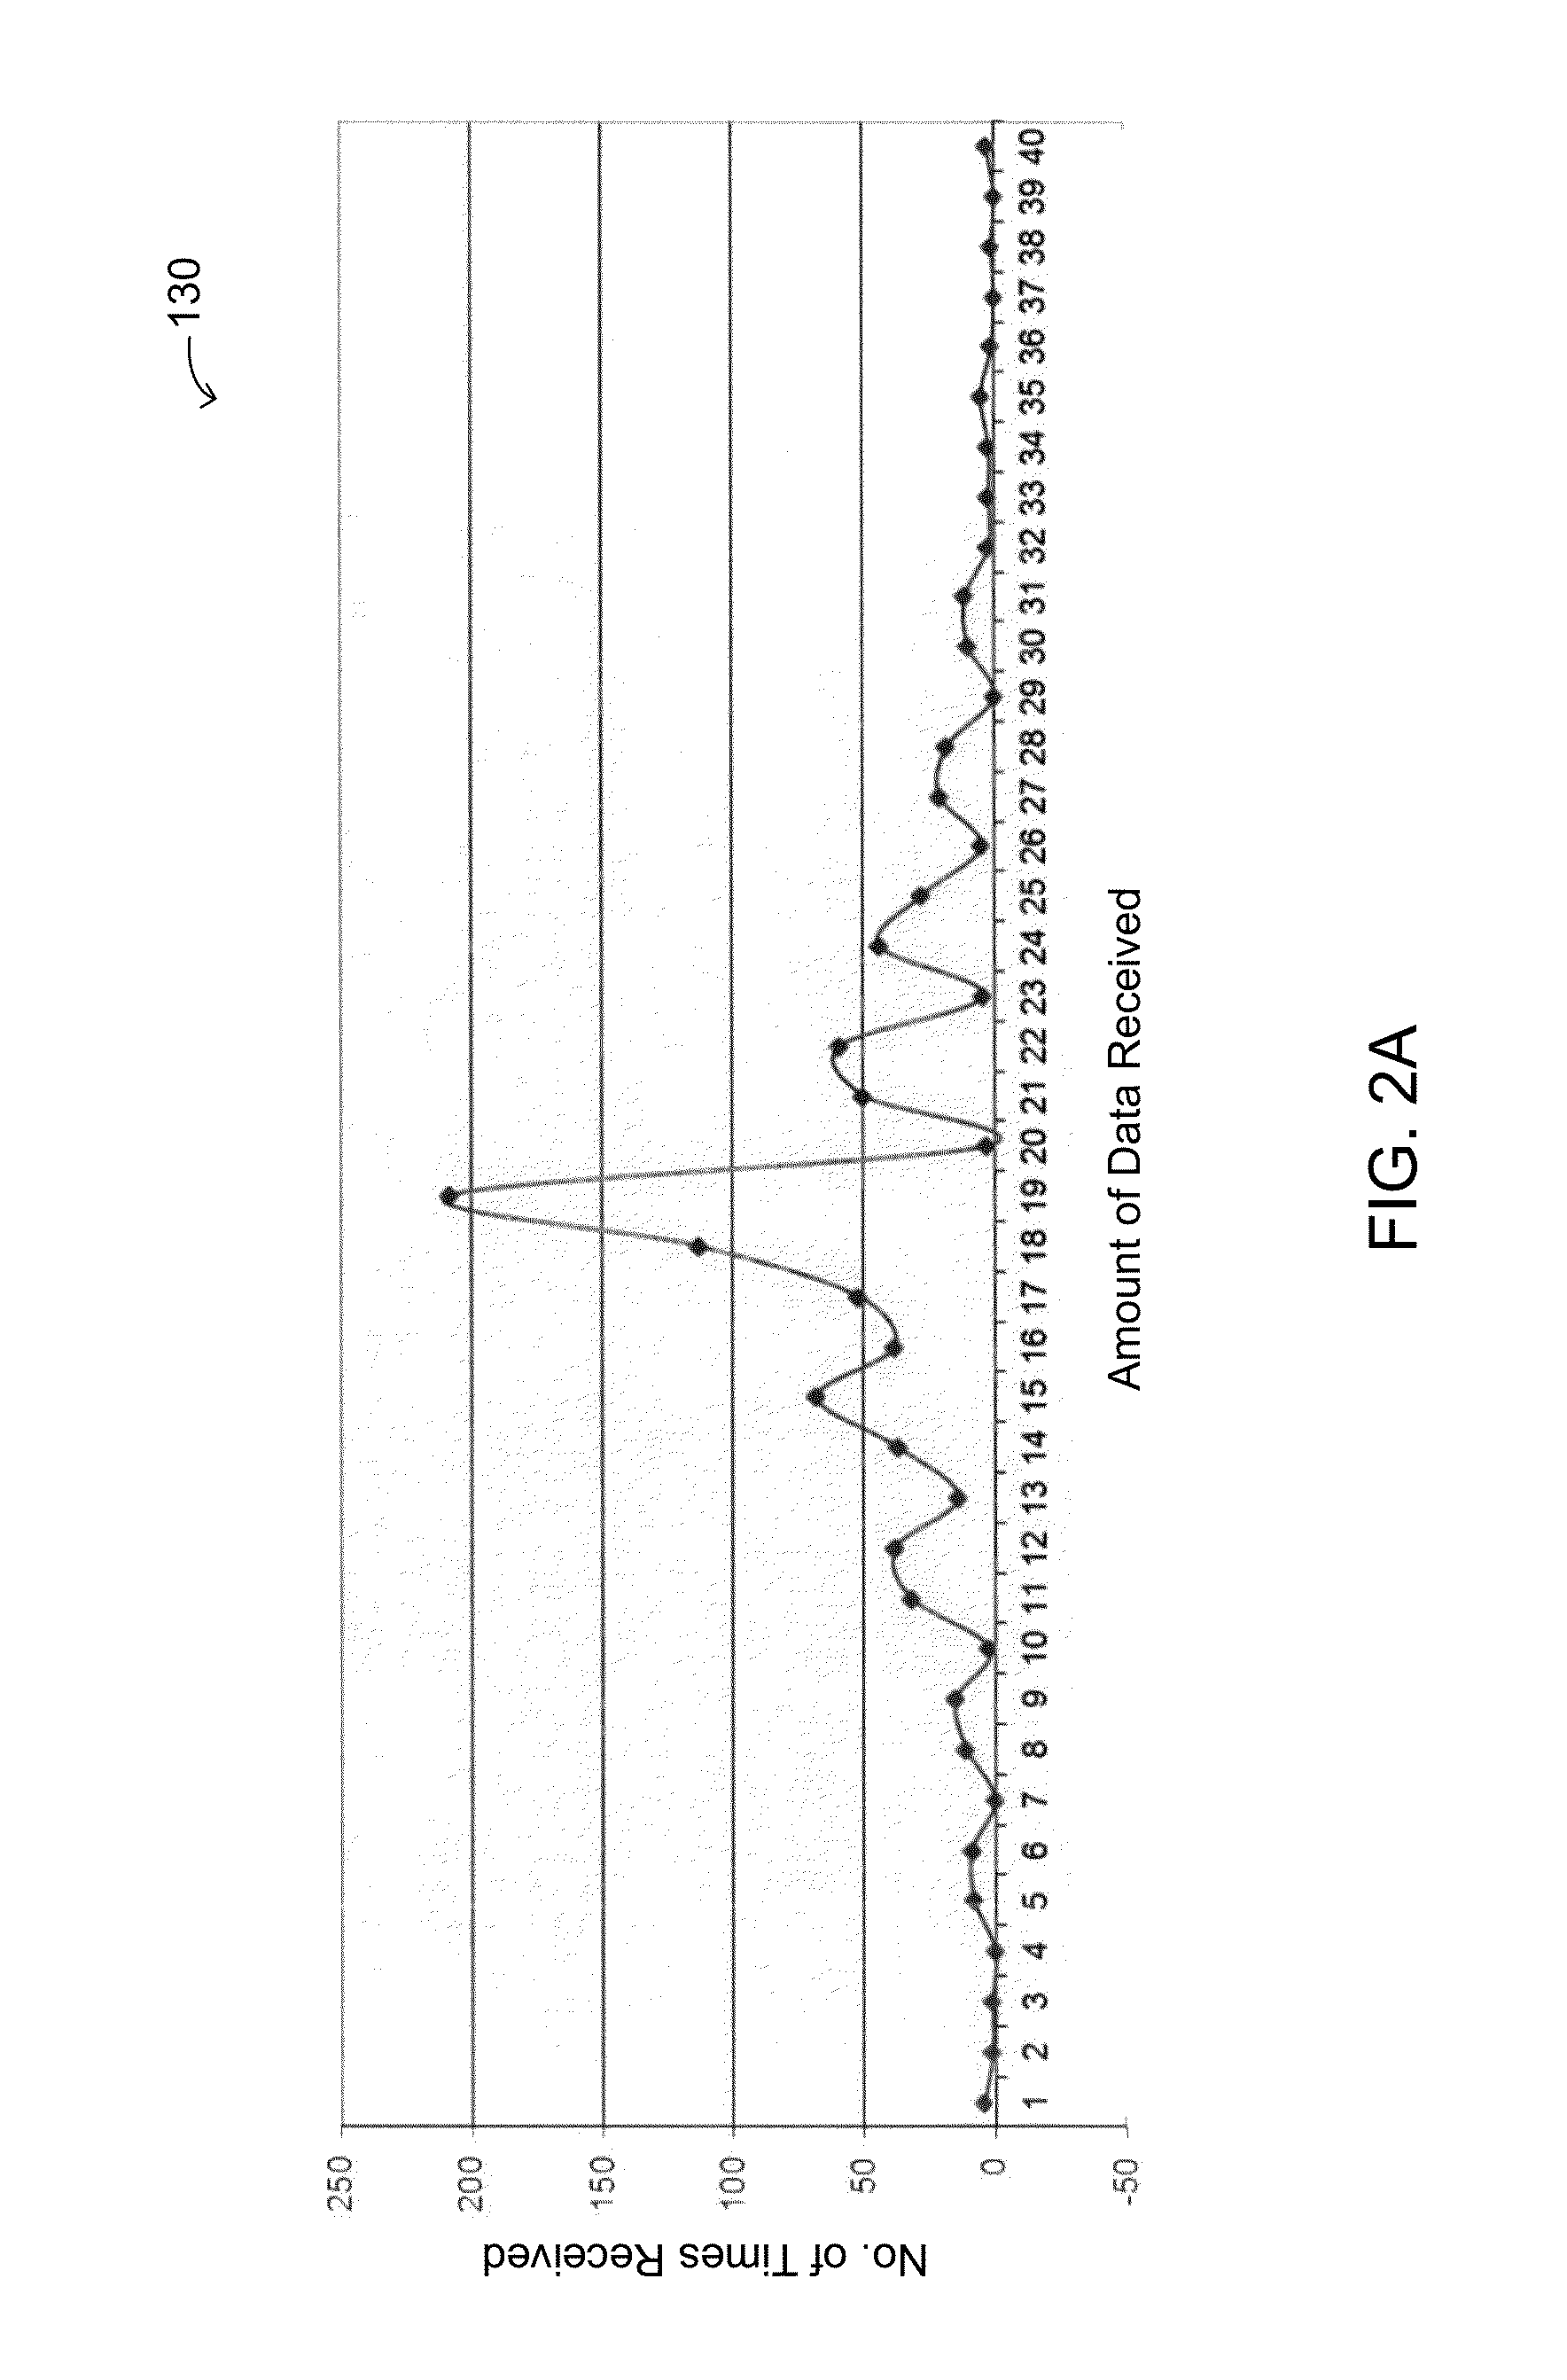 Method and apparatus for estimating packet loss